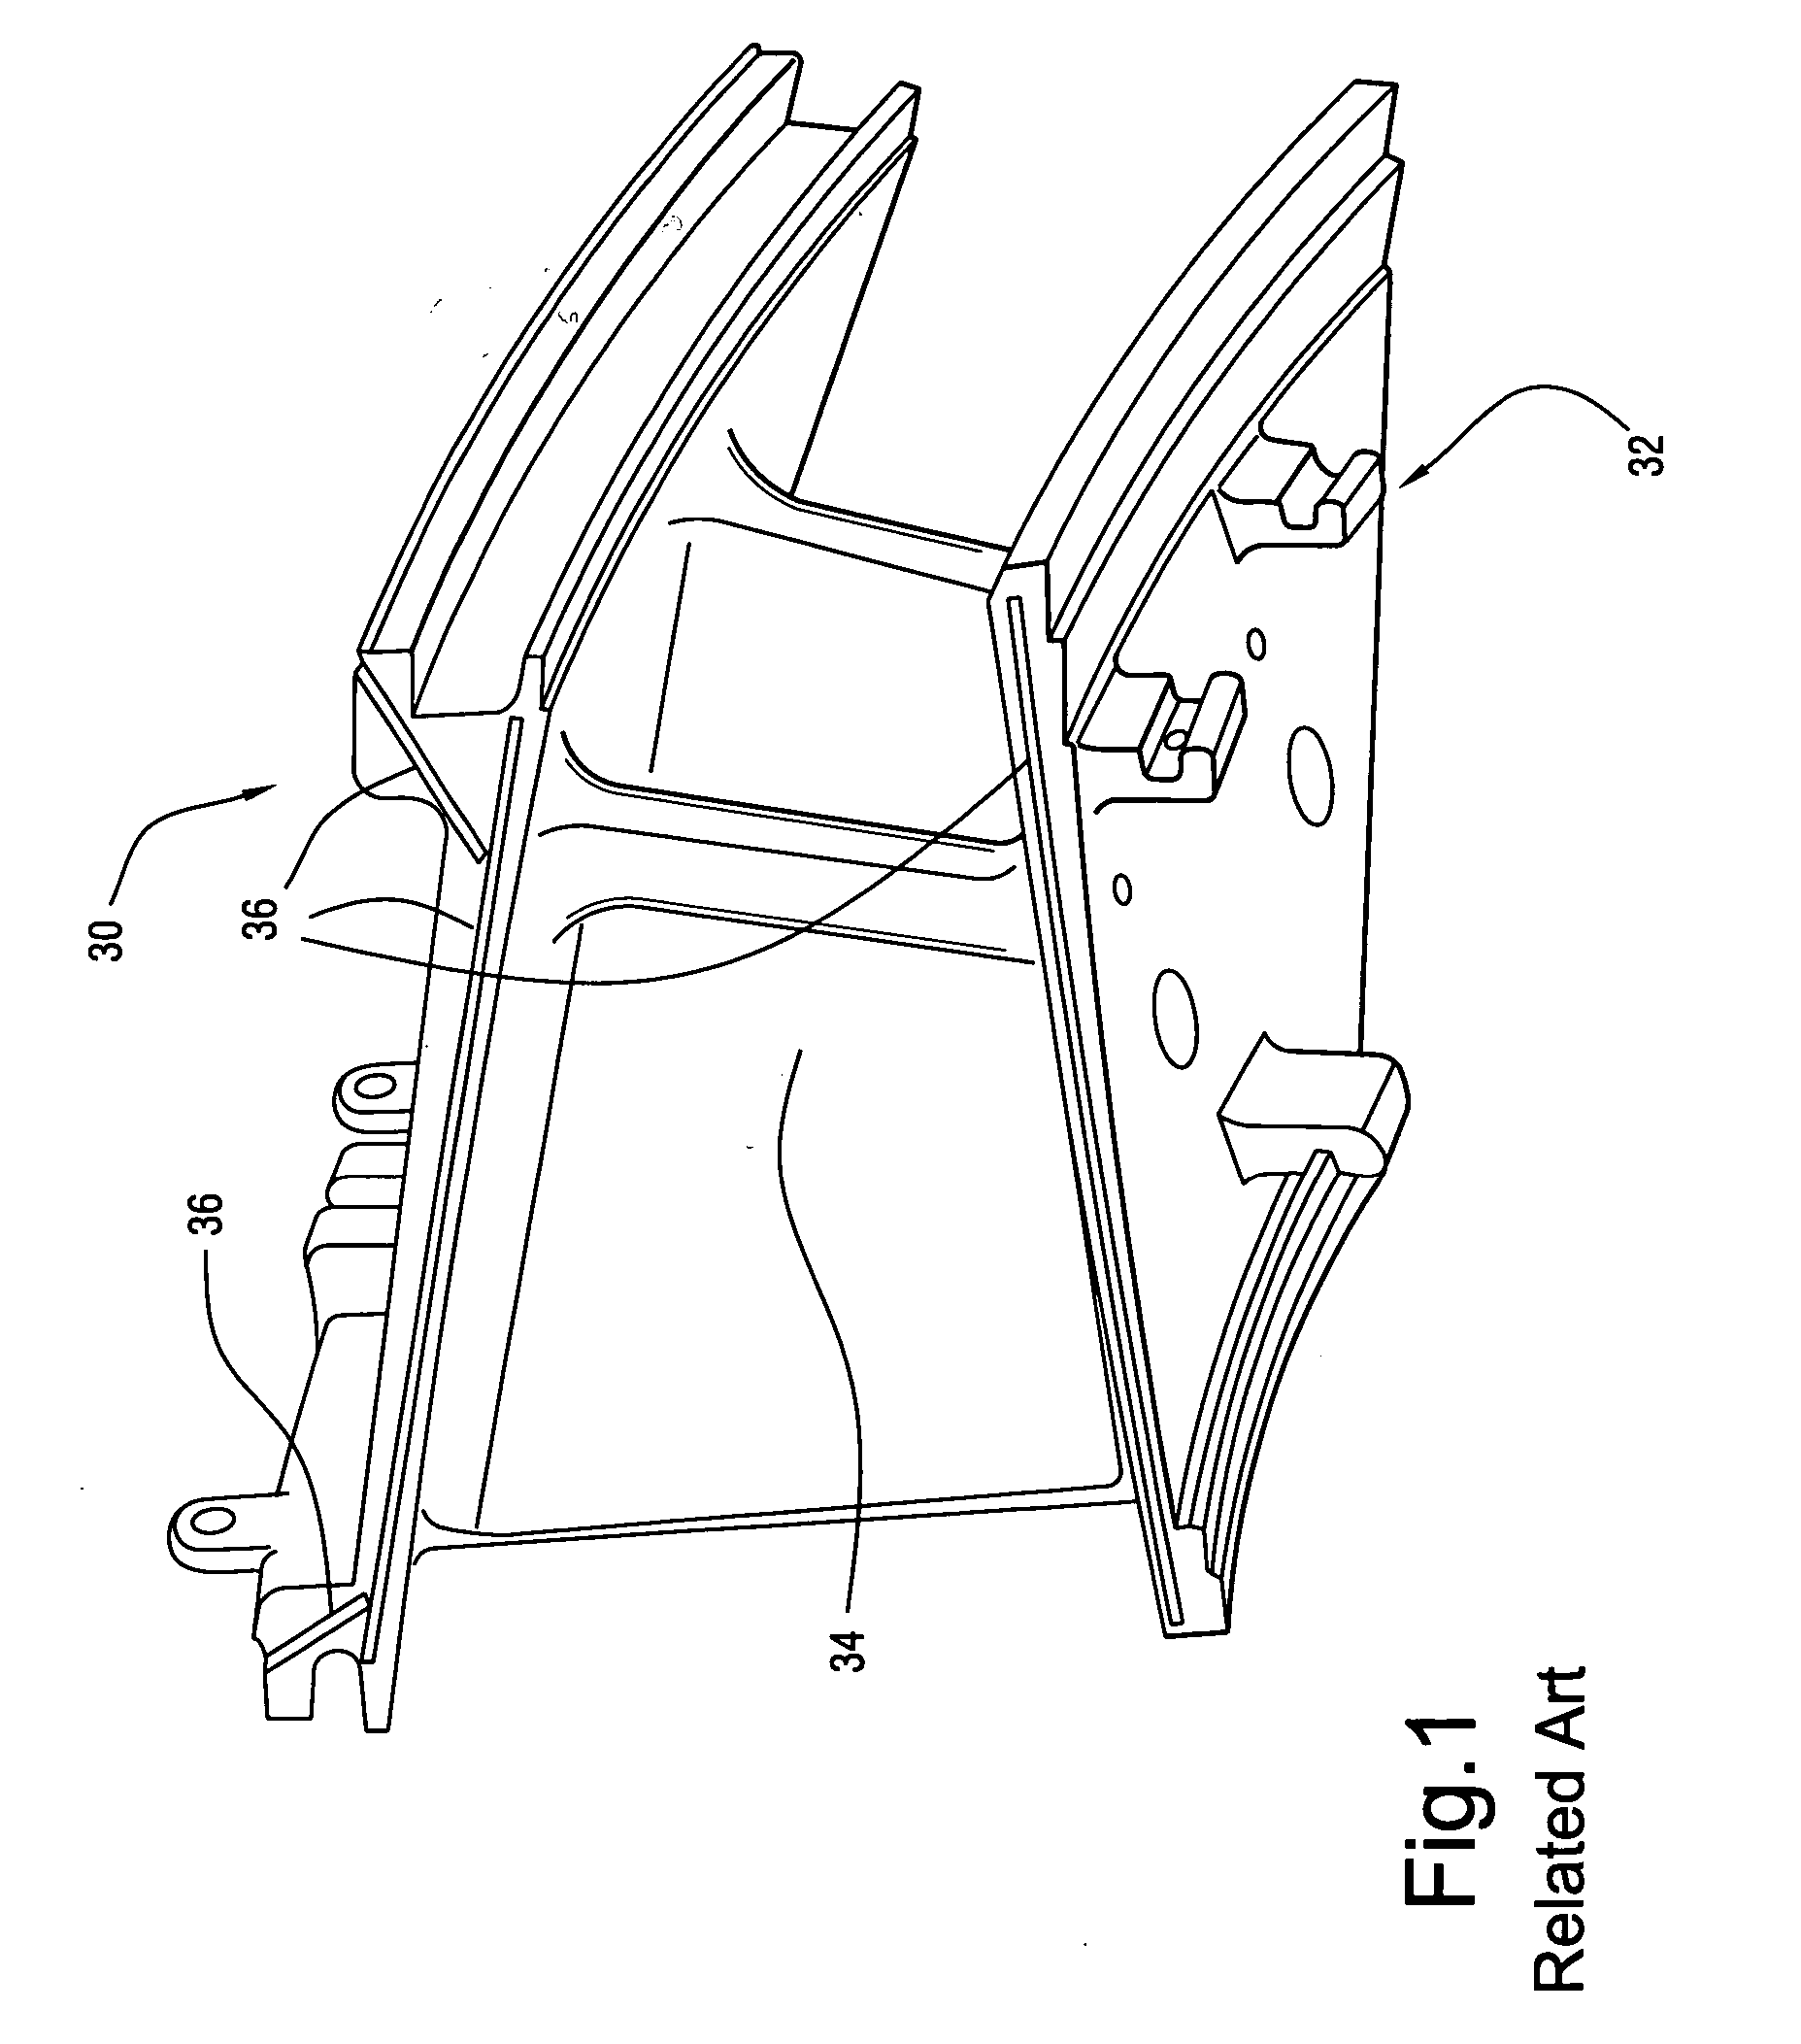 Nozzle seal slot measuring tool and method